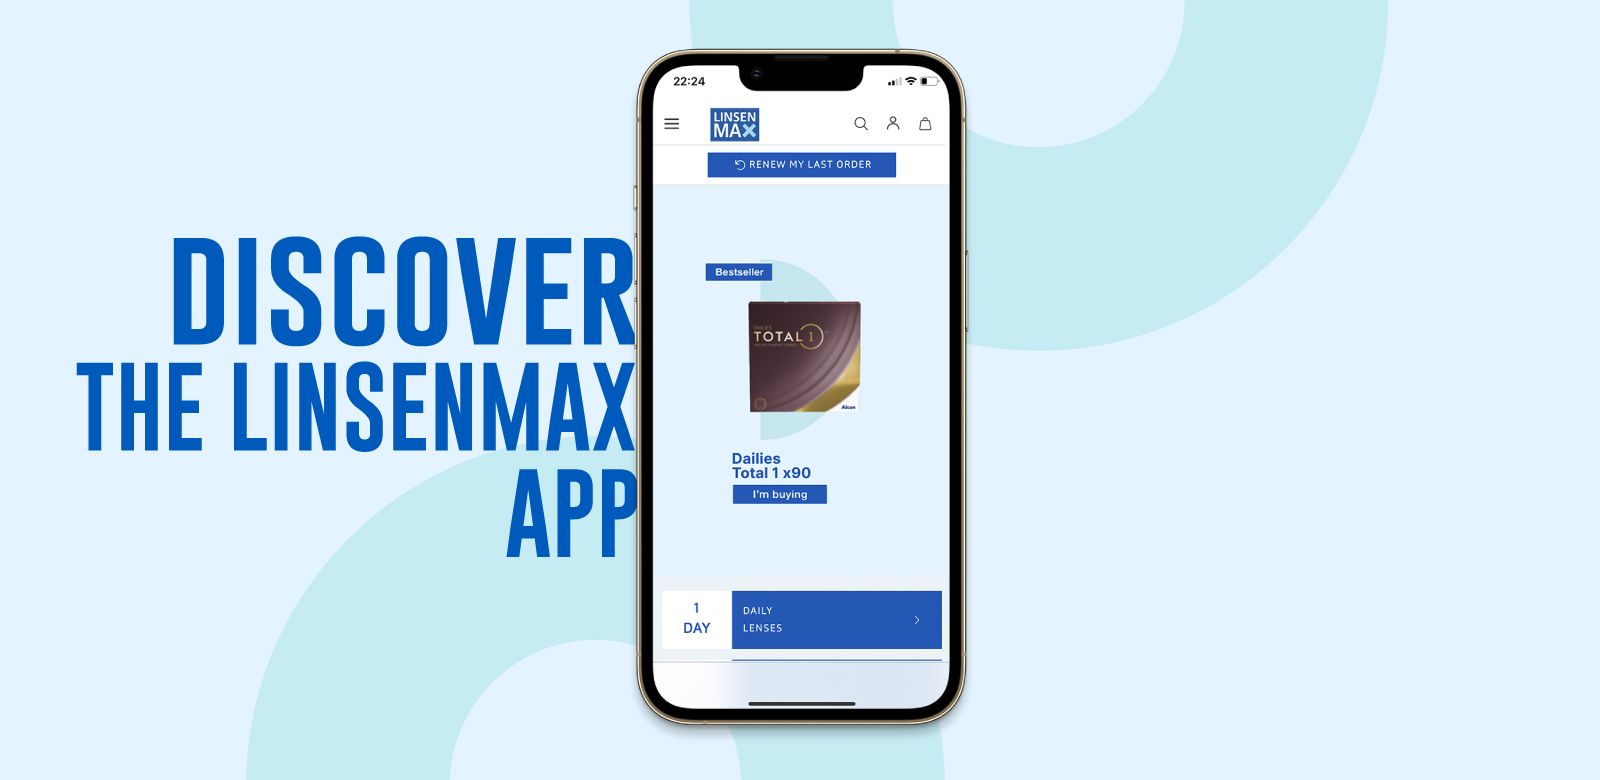 Discover the Linsenmax app